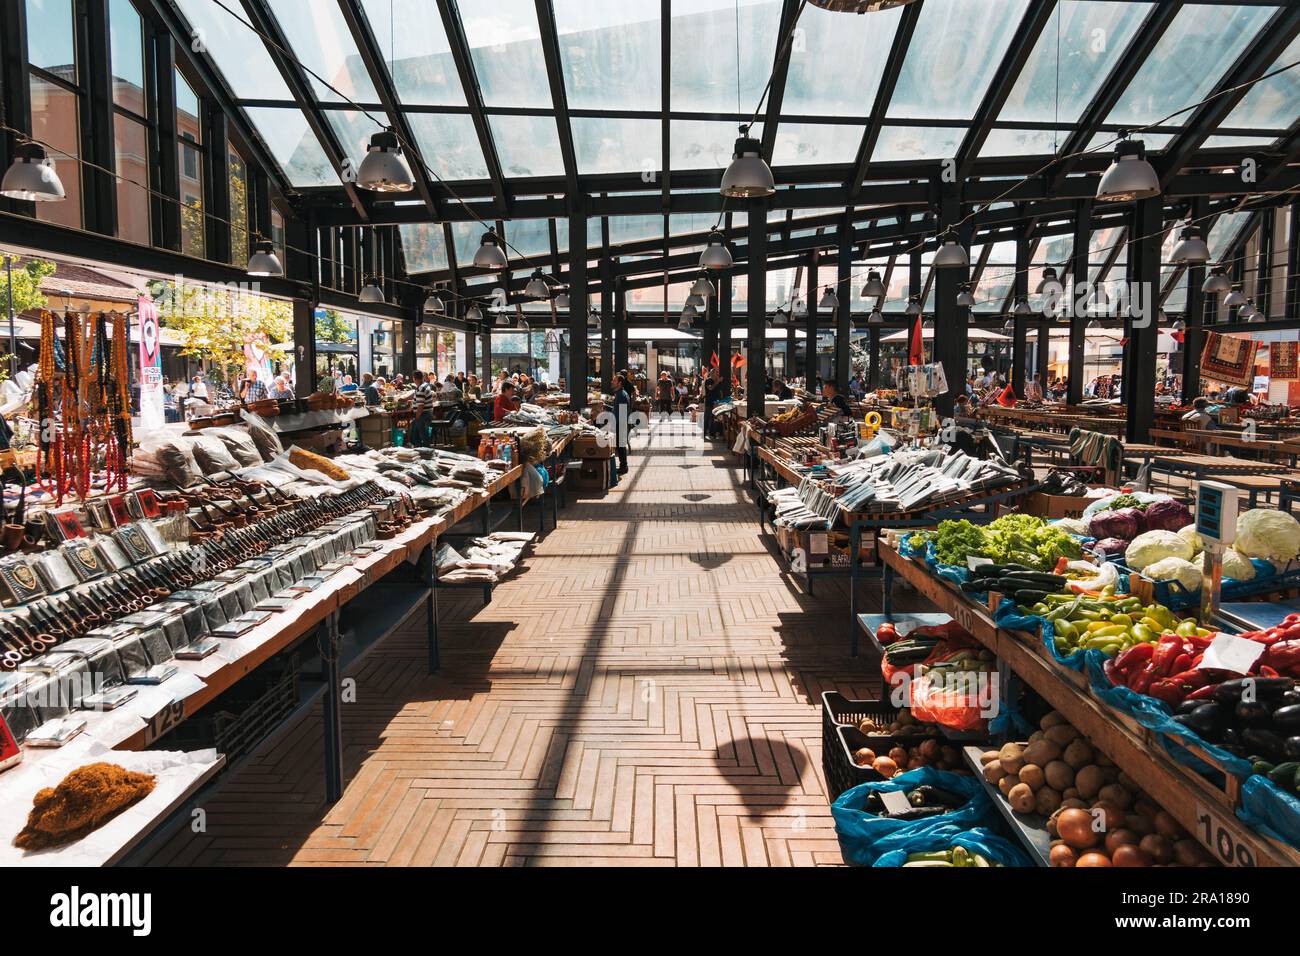 Produce and household goods and souvenirs for sale at the New Bazaar (Pazari i Ri), a glass-covered market in Tirana, Albania Stock Photo